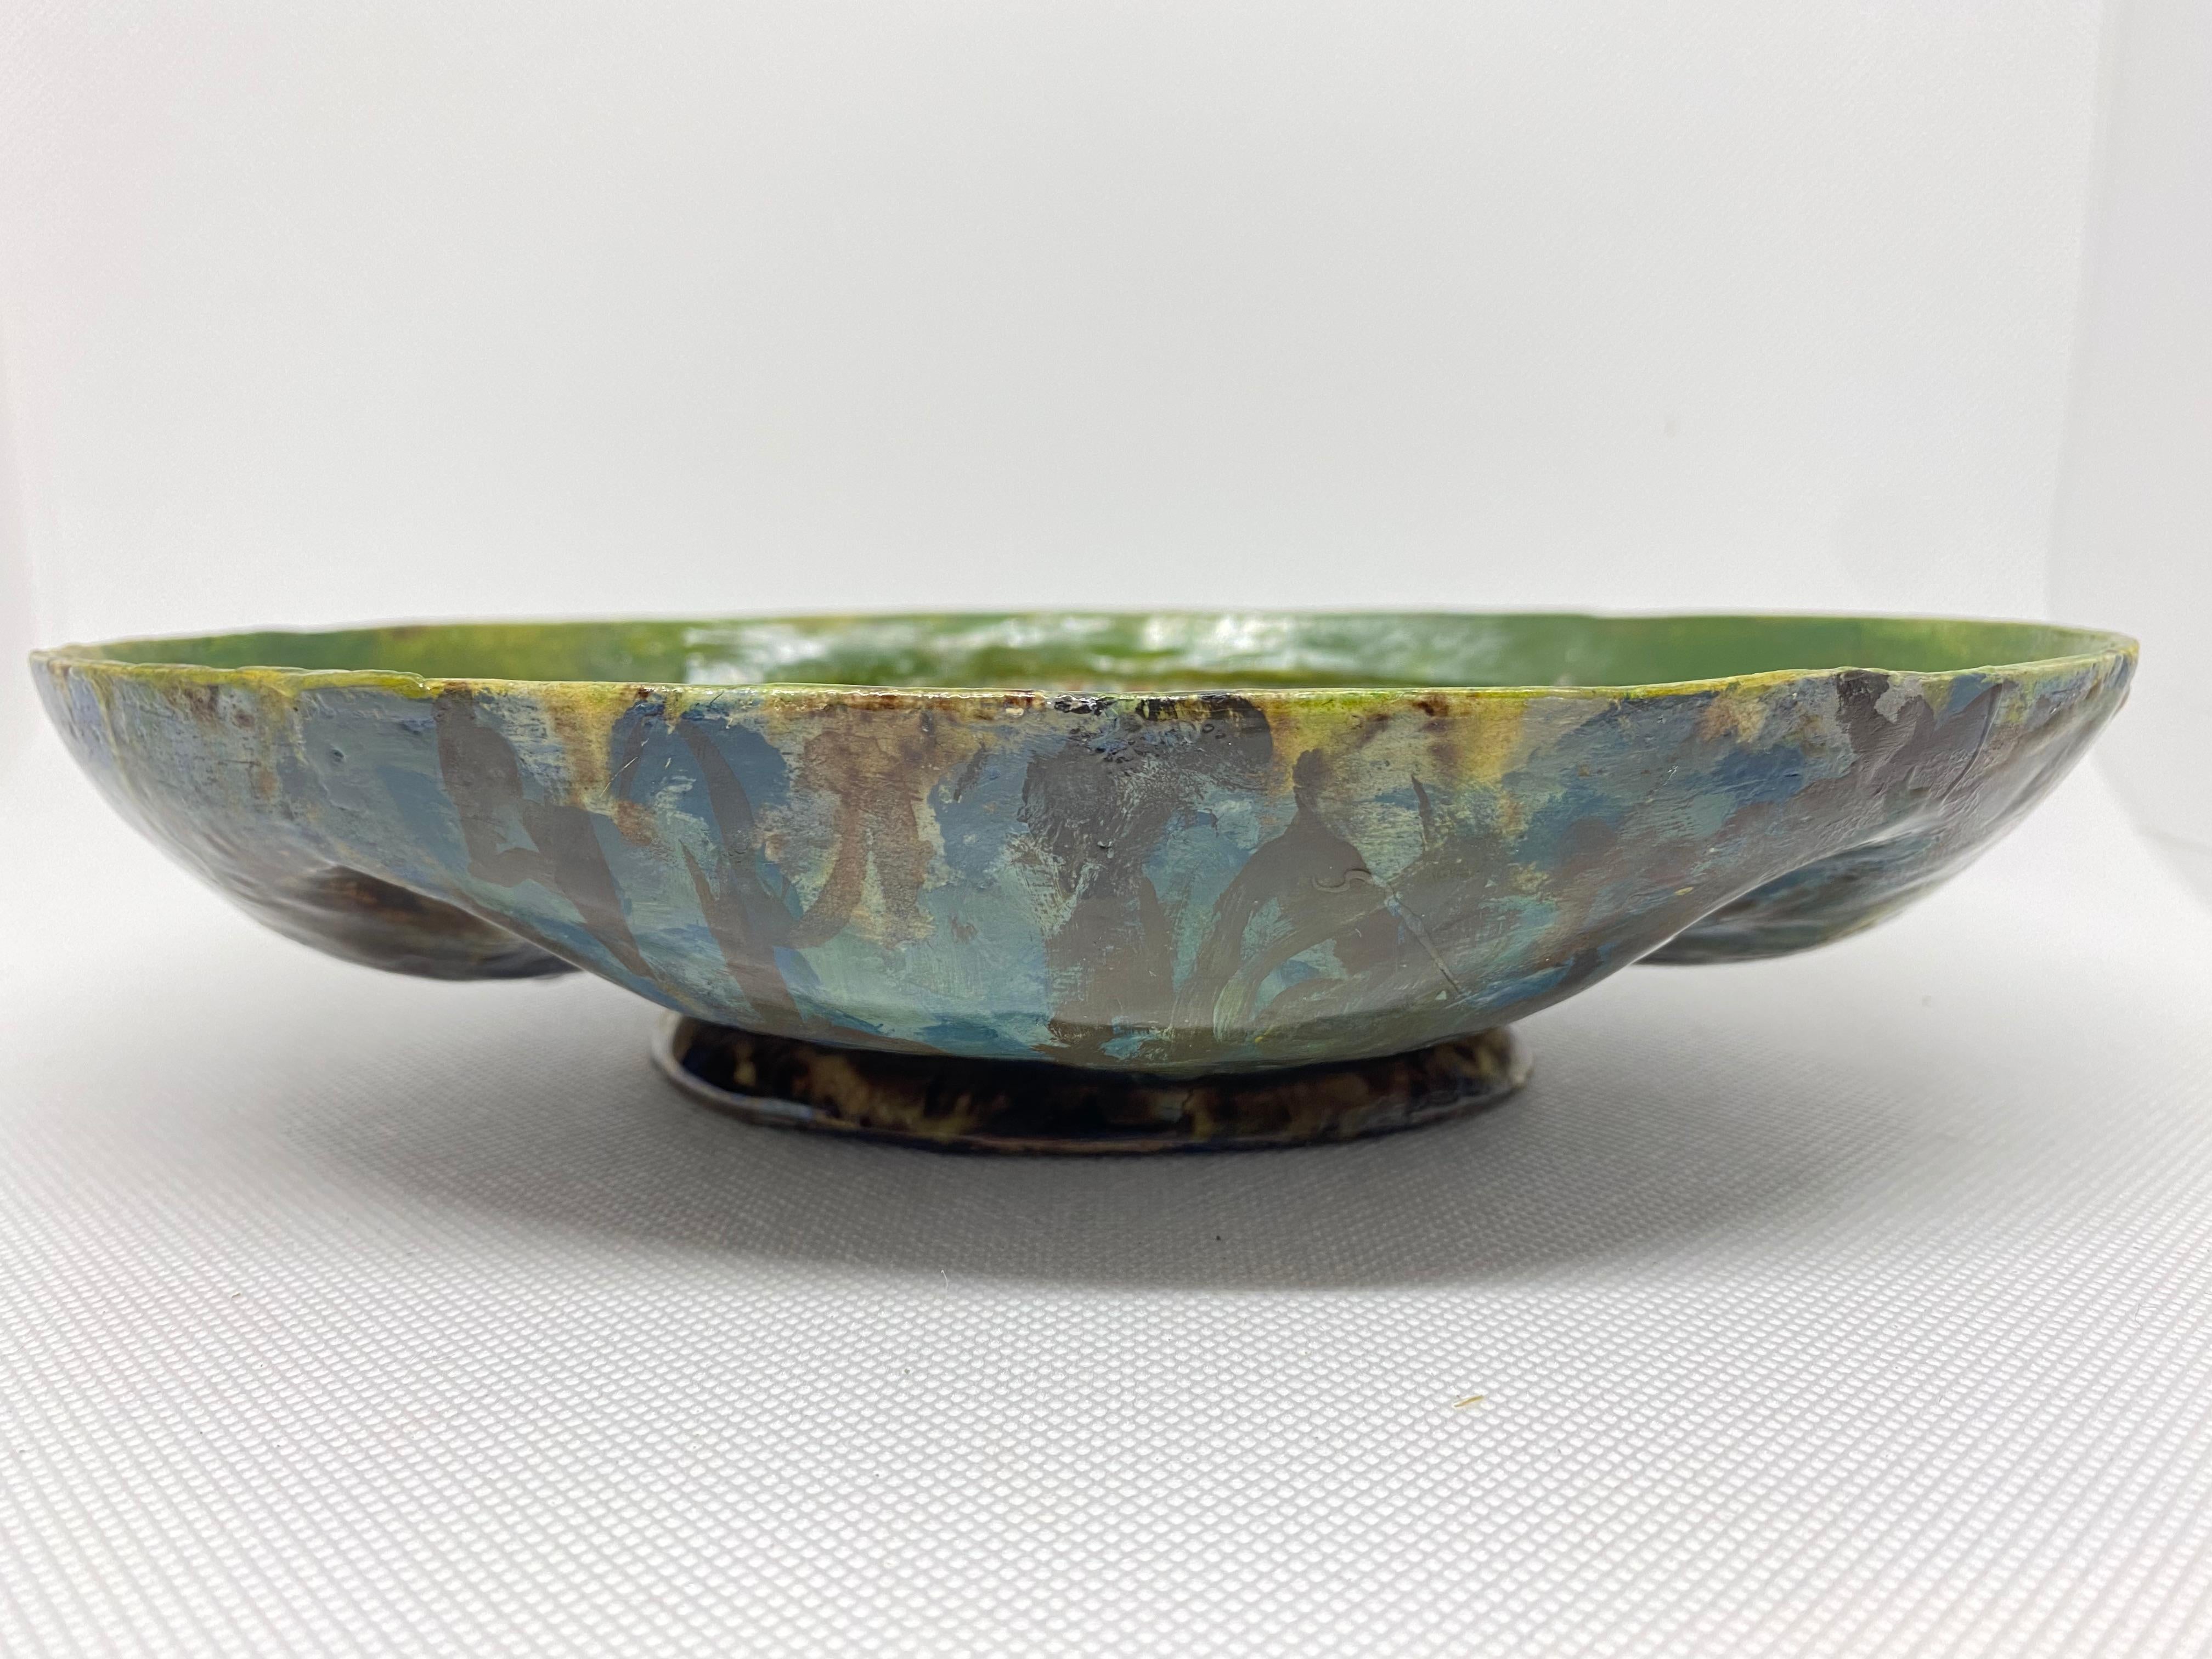 French glazed earthenware bowl in the manner of Bernard Palissy.

Bernard Palissy (1510-1590) was a French potter who created extravagant glazes on his rustic ceramics which often featured naturalistic forms and creatures. He prepared a plan for a